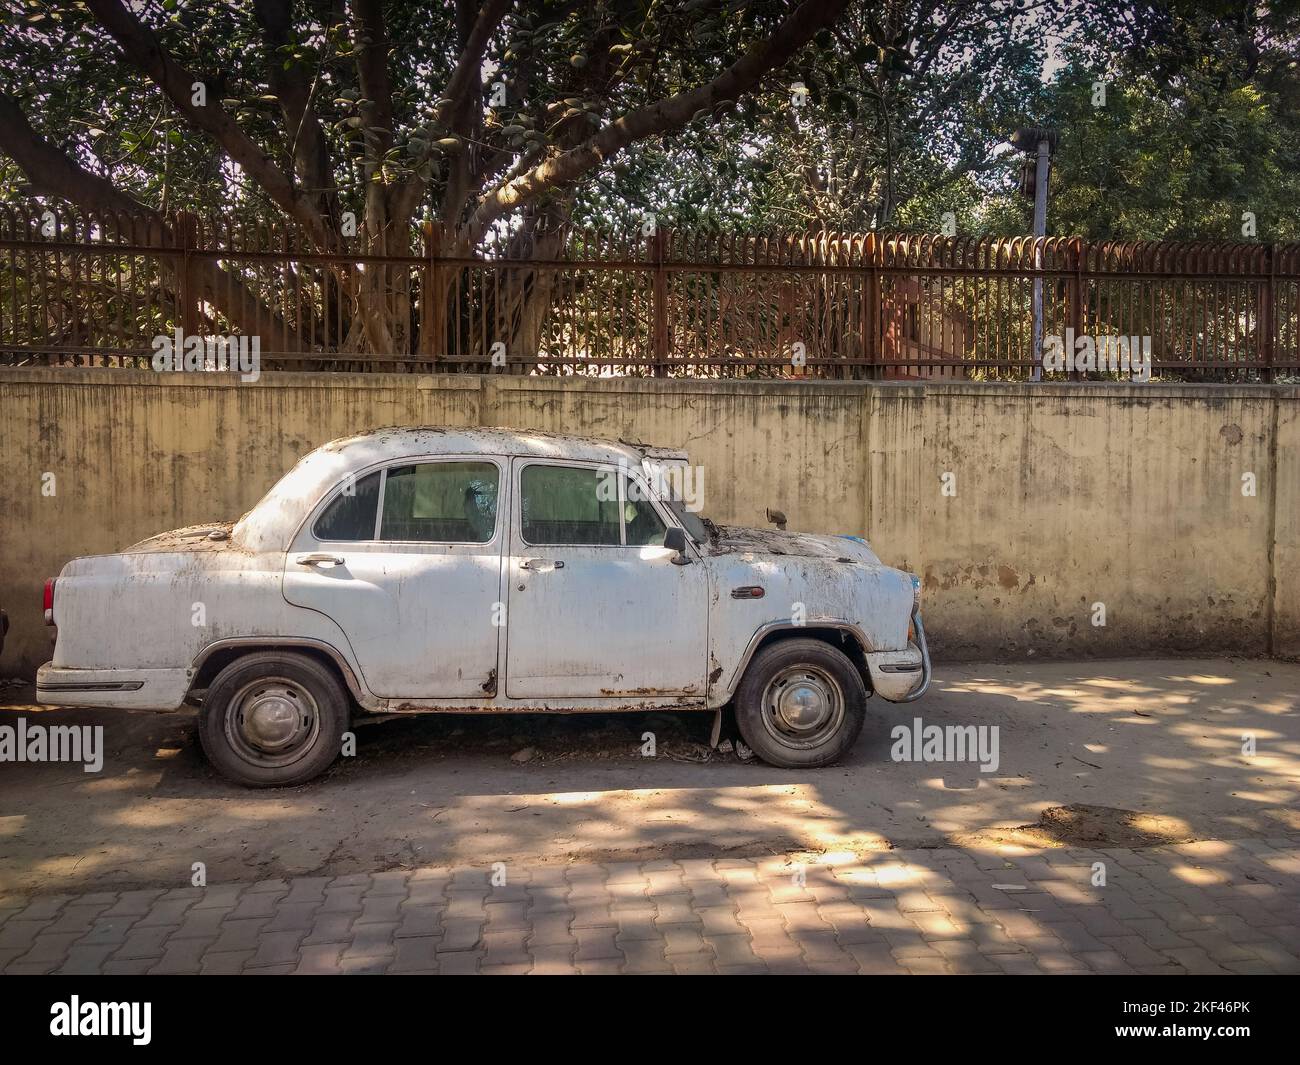 New Delhi, India - A beige vintage White Ambassador car is parked on a street Stock Photo